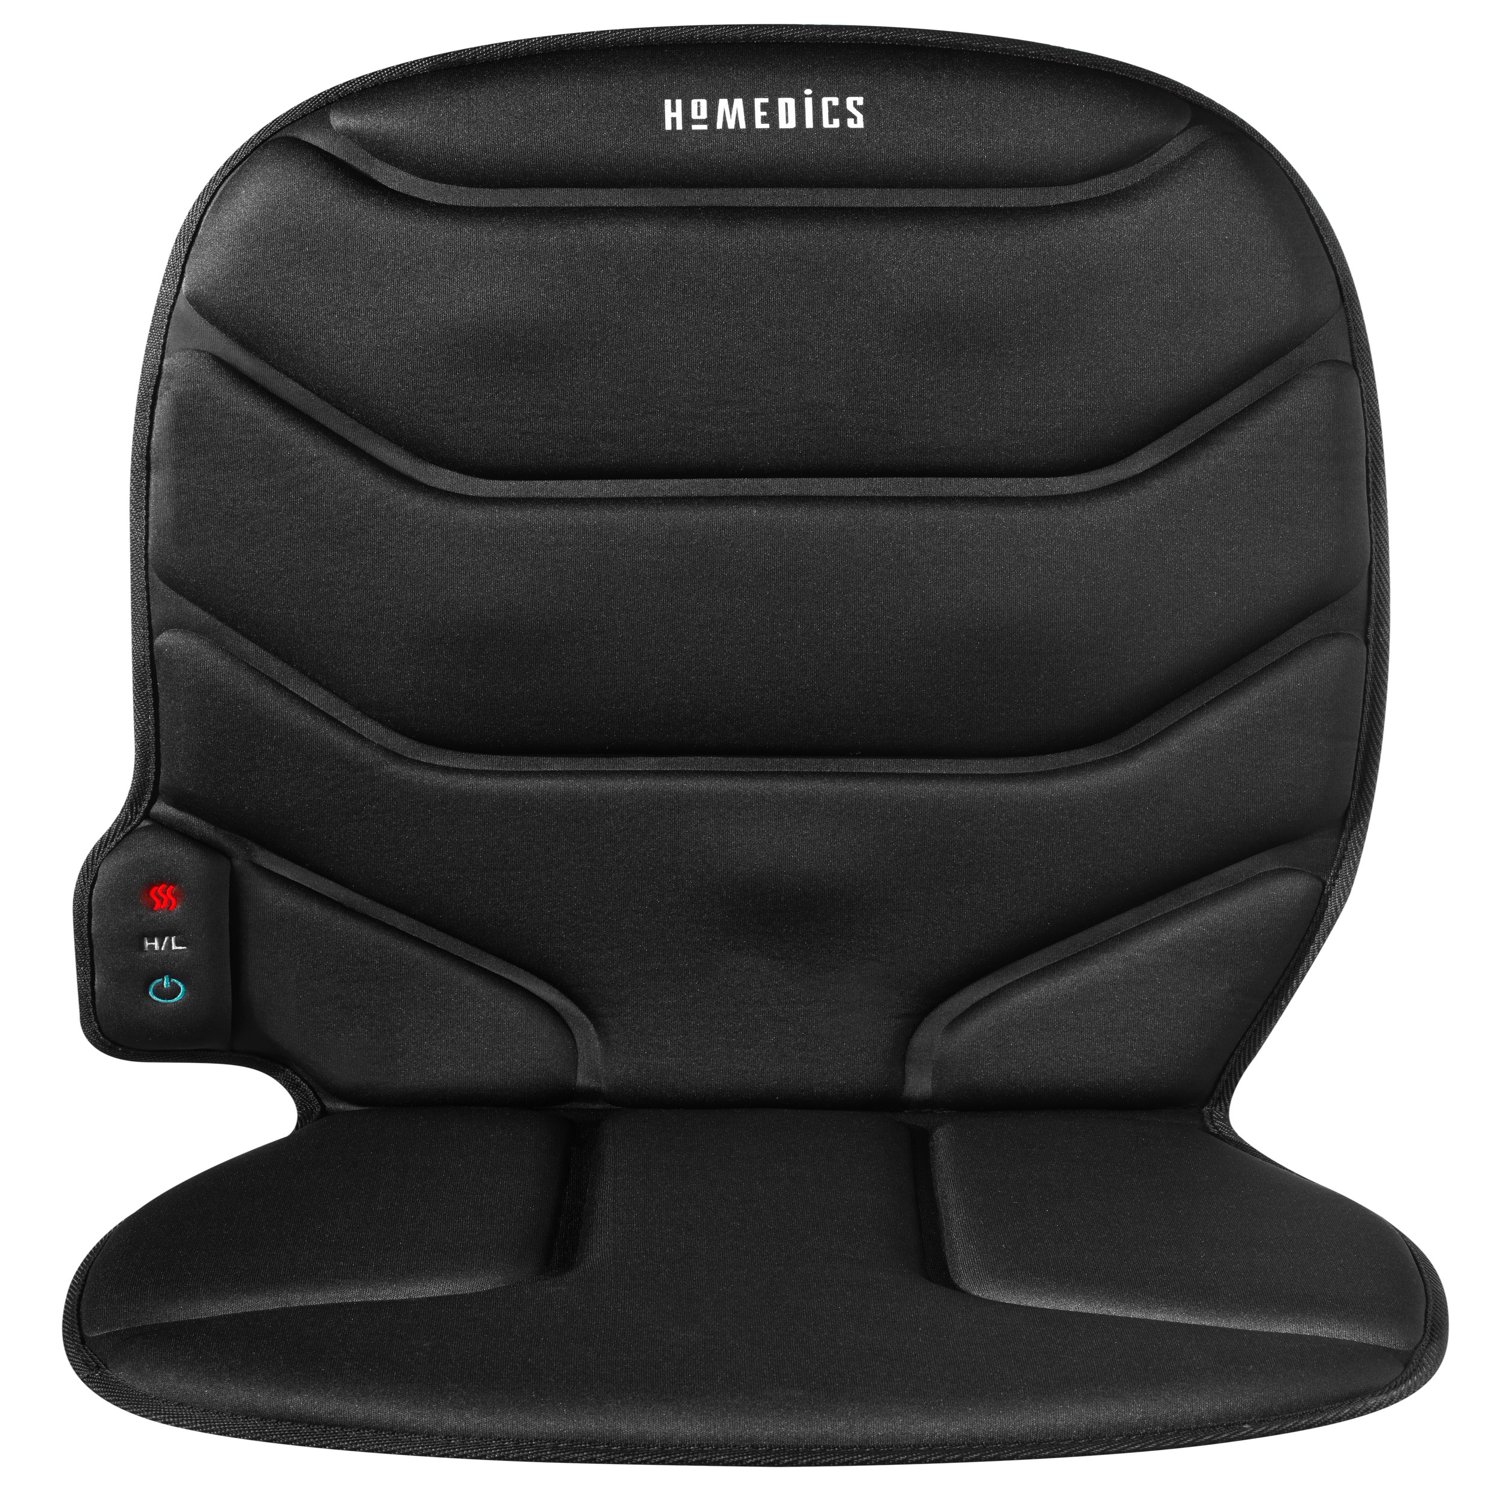 HoMedics Massage Comfort Cushion with Heat, Integrated Control for Back - image 4 of 9